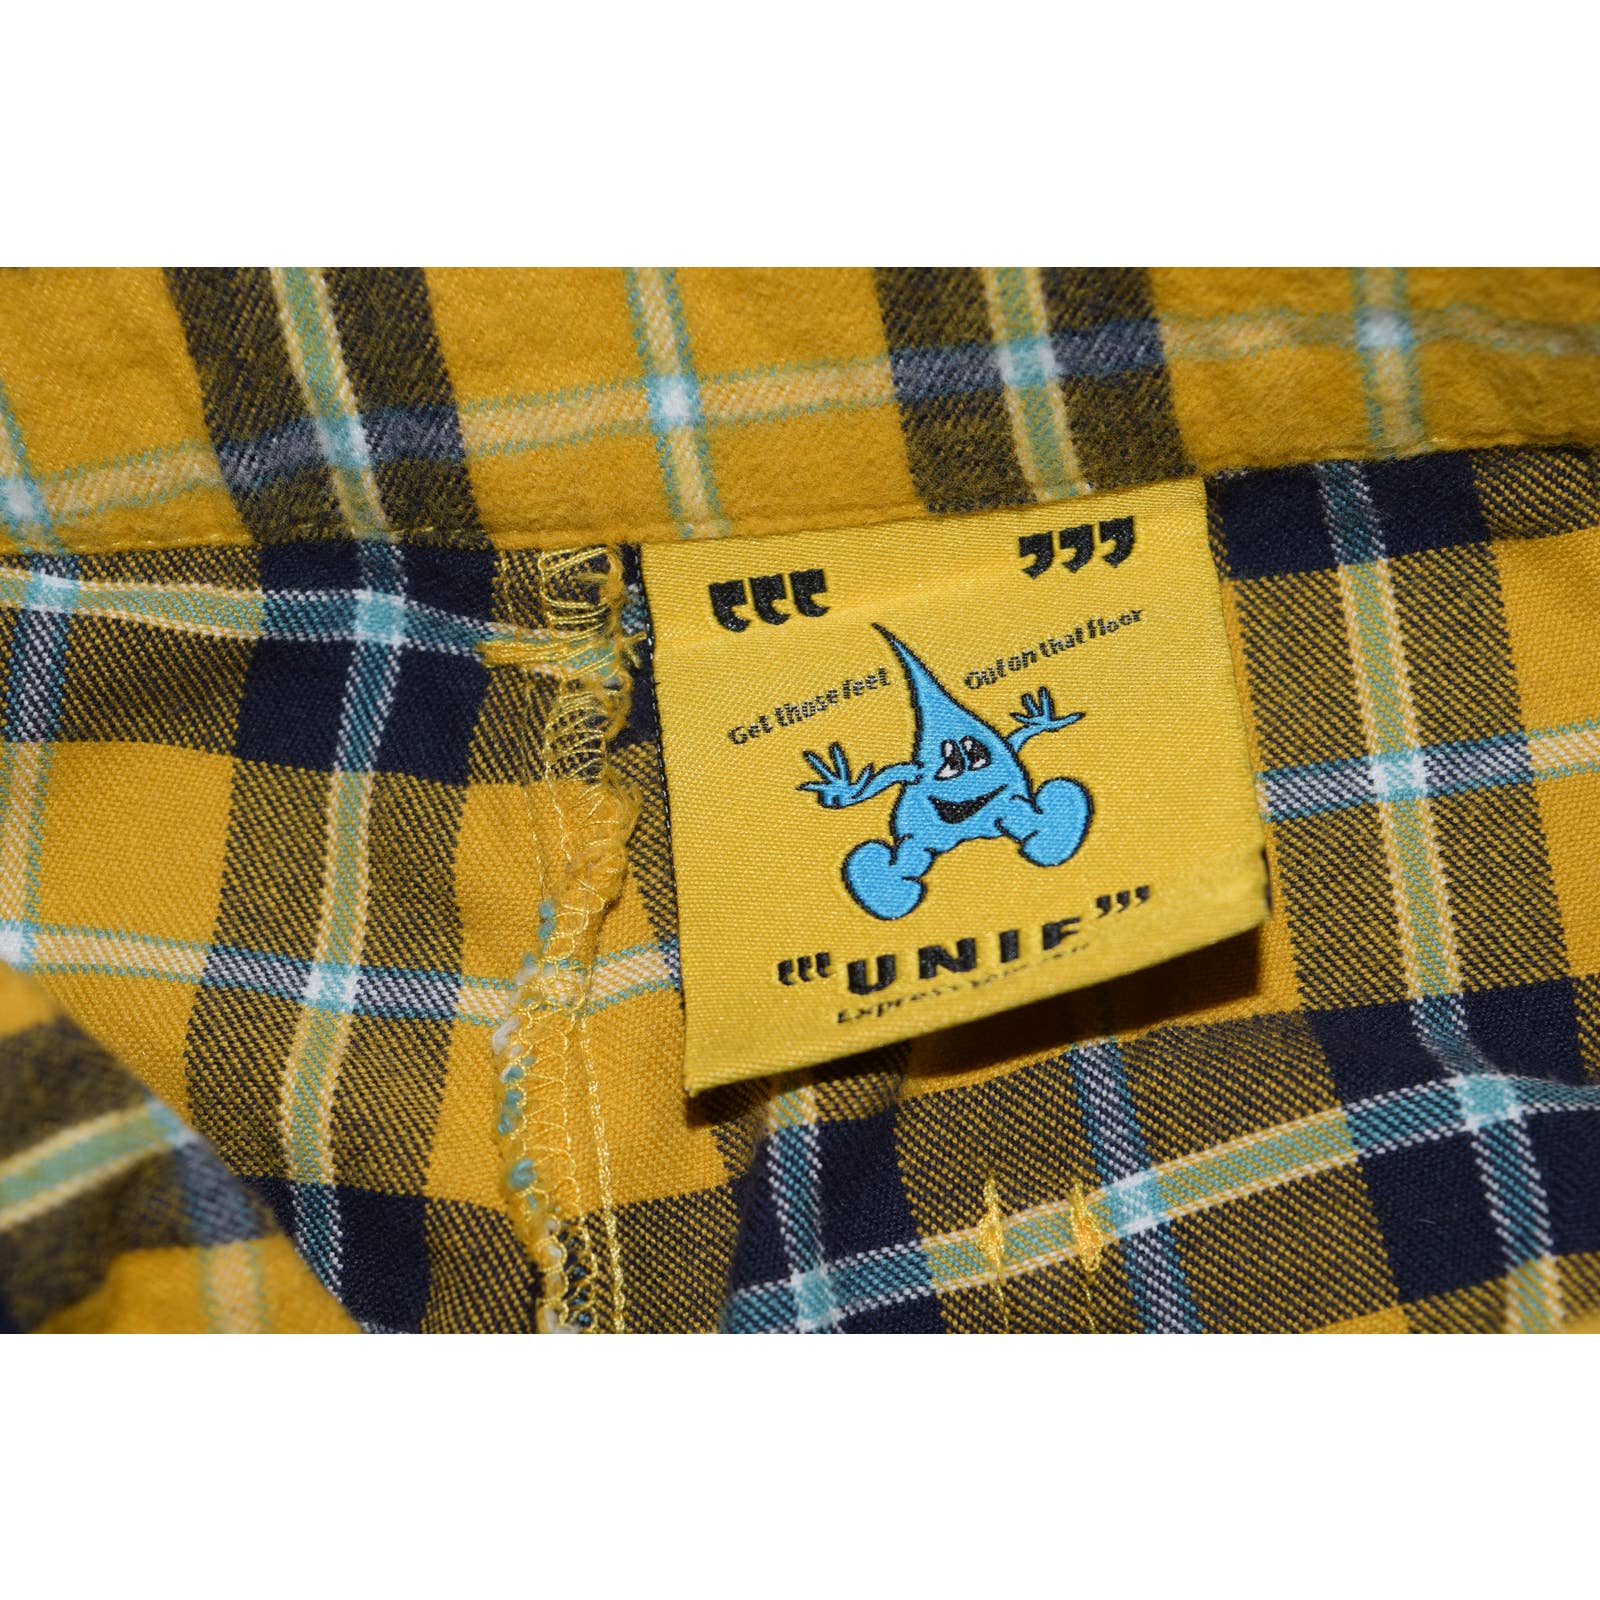 UNIF Yellow and Black Scotch Plaid Flannel Pants - 27